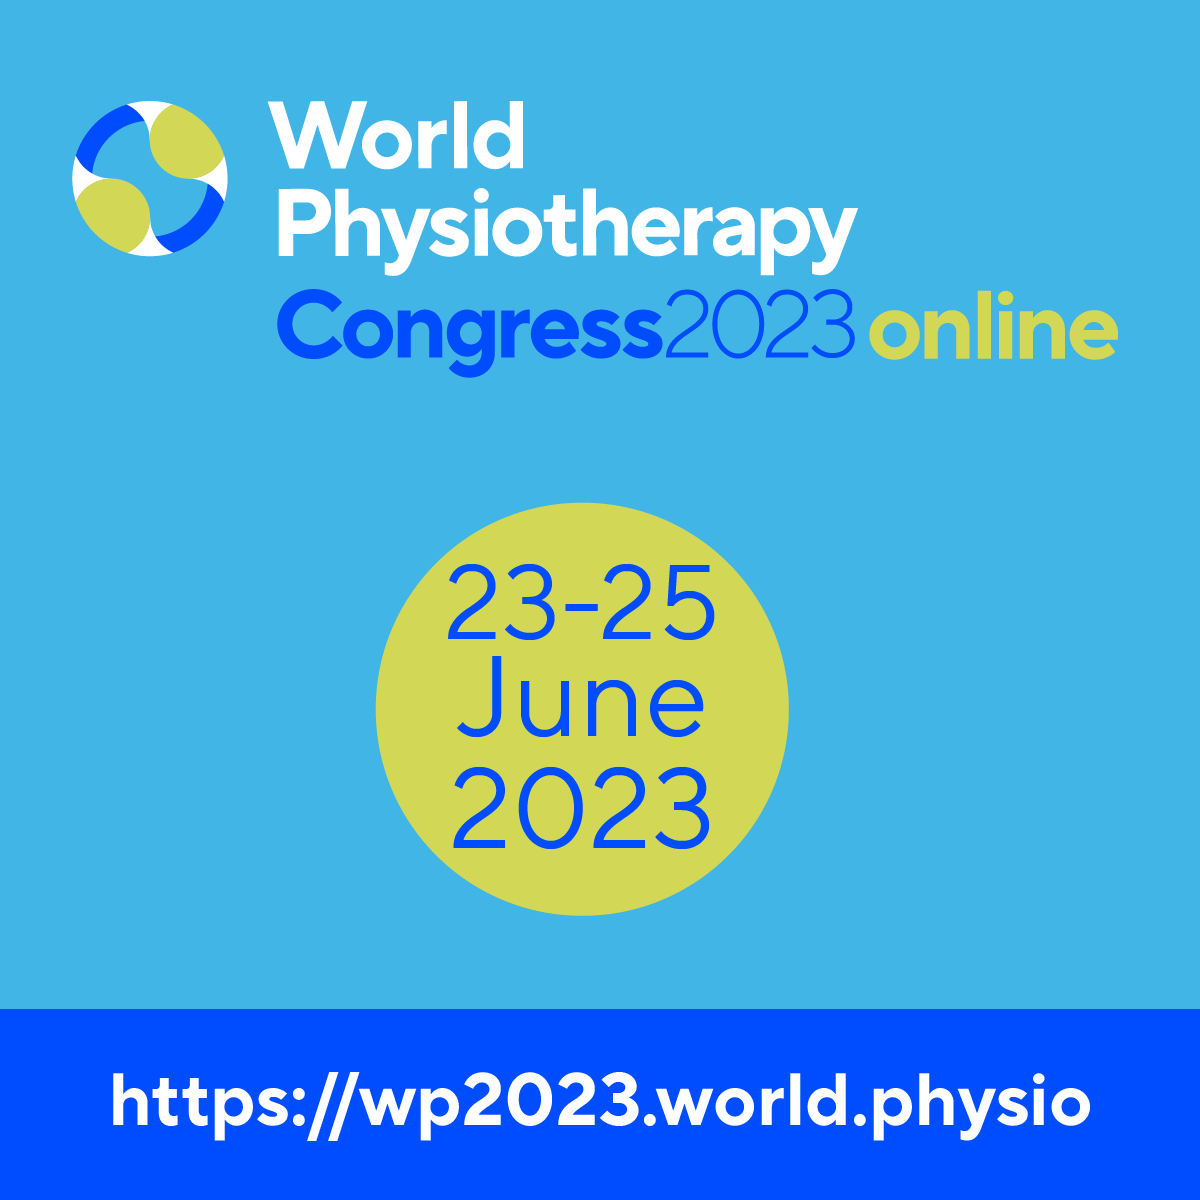 If you weren’t able to join #WorldPhysio2023 in Dubai, you can still take part in our online event, 23-25 June 2023. Find out more and get ready to take part: ow.ly/yqHX50OMYGS #GlobalPT @AWcpta @WorldPhysioAWP @ERWorldPhysio @WorldPhysioNACR @WorldPhysioSAR